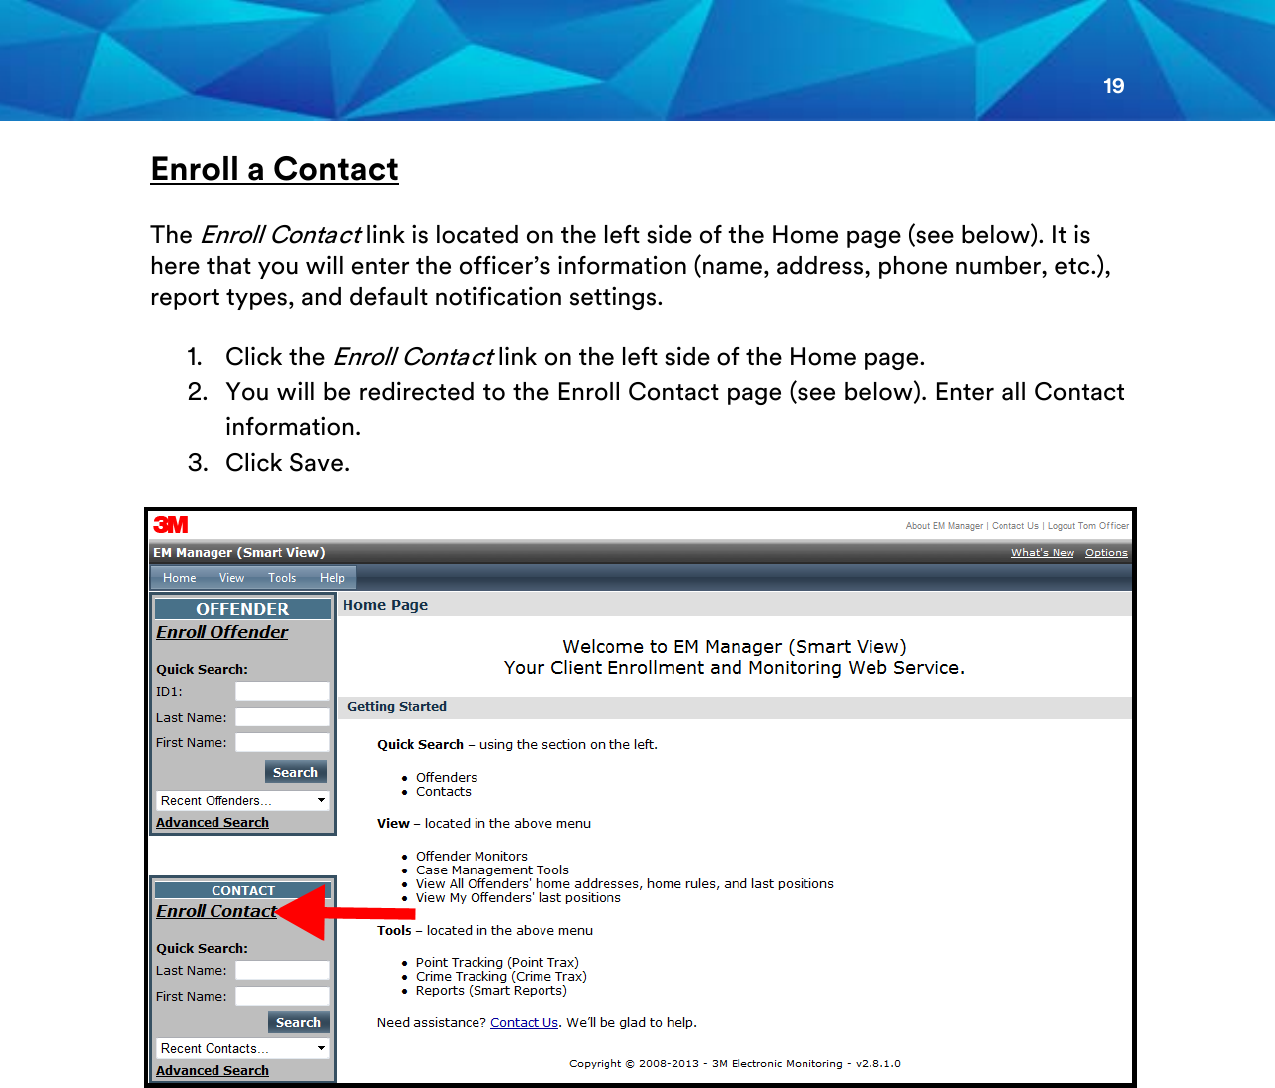 19  Enroll a Contact The Enroll Contact link is located on the left side of the Home page (see below). It is here that you will enter the officer’s information (name, address, phone number, etc.), report types, and default notification settings. 1. Click the Enroll Contact link on the left side of the Home page.  2. You will be redirected to the Enroll Contact page (see below). Enter all Contact information. 3. Click Save.      